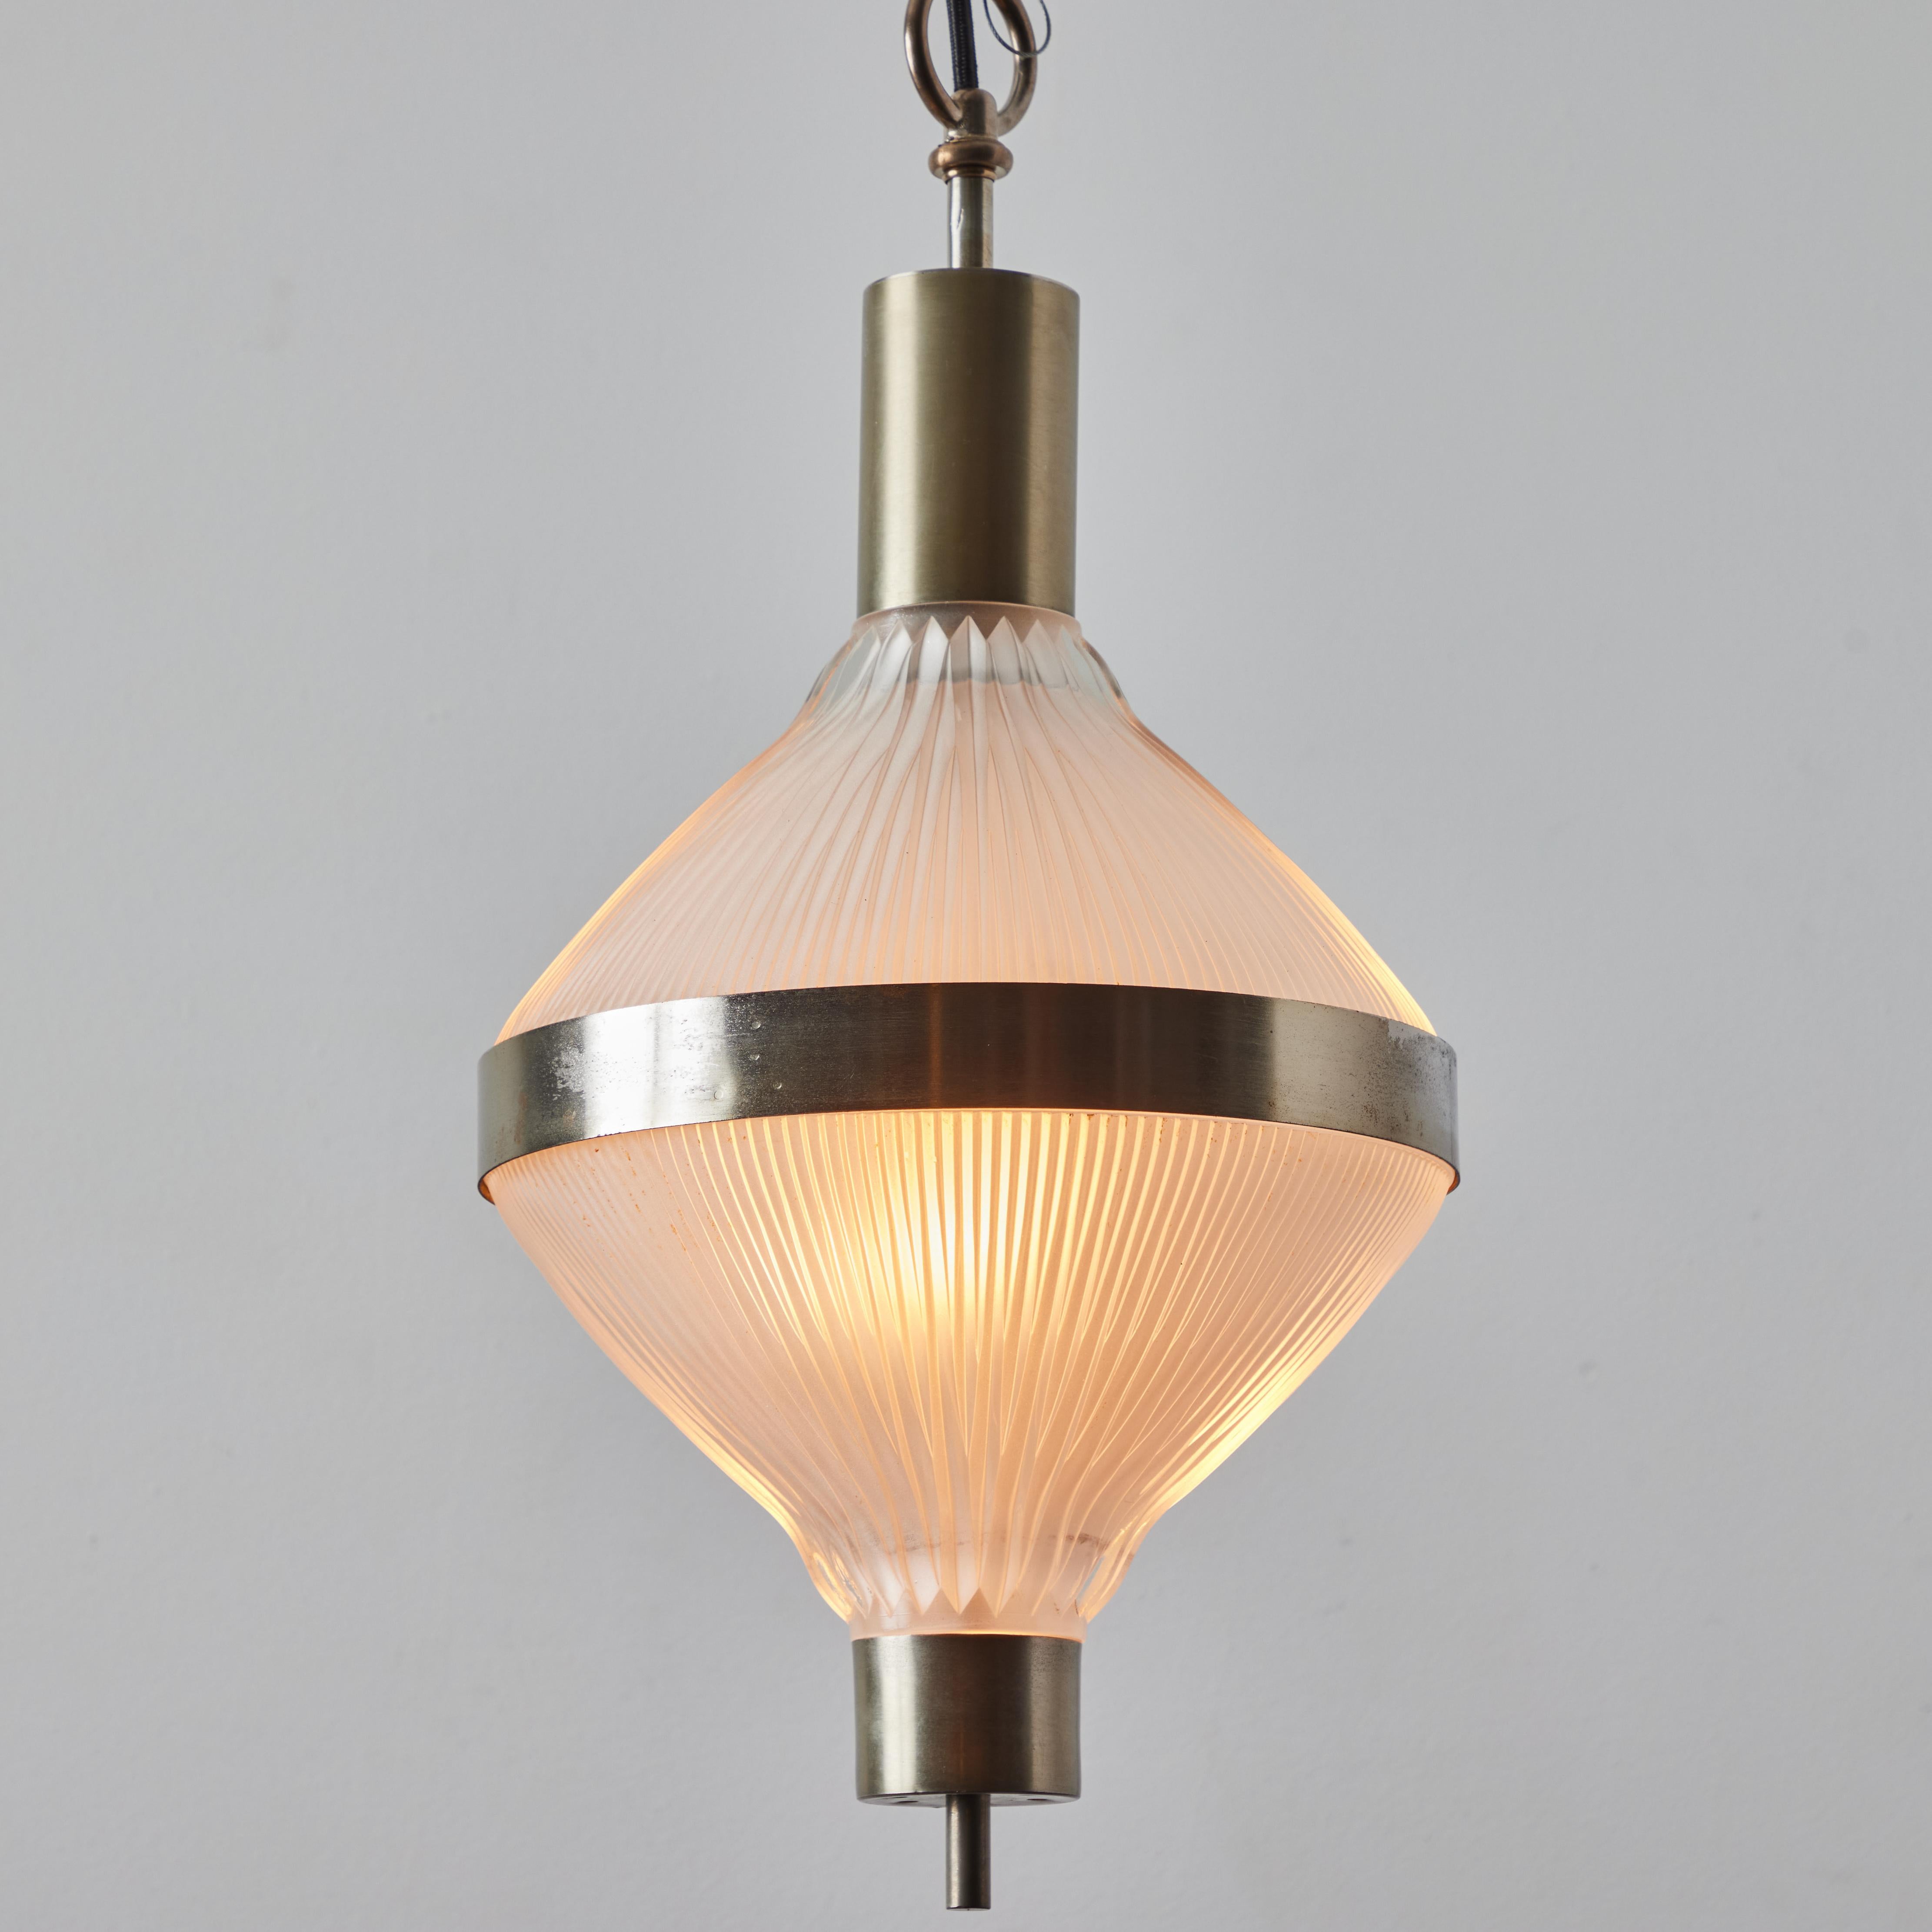 Large Studio B.B.P.R 'Polinnia' Glass and Metal Pendant c. 1964 for Artemide. Executed in nickel-colored metal and pressed glass and designed by the Milan based collective founded by Gian Luigi Banfi, Lodovico Barbiano di Belgiojoso, Enrico